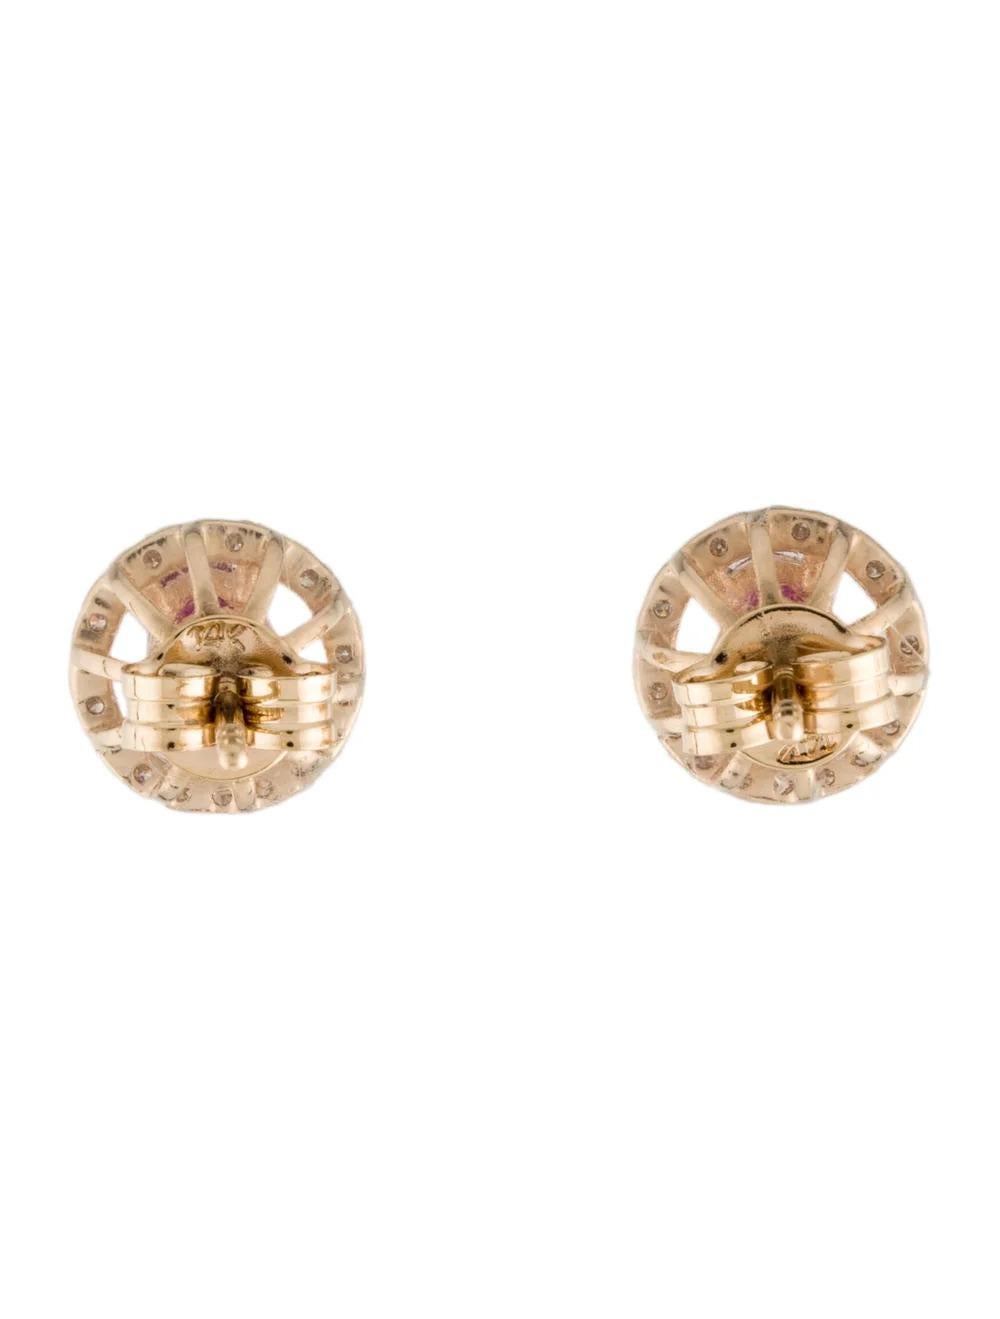 14K Ruby & Diamond Stud Earrings - Timeless Elegance, Stunning Design, Luxury In New Condition For Sale In Holtsville, NY